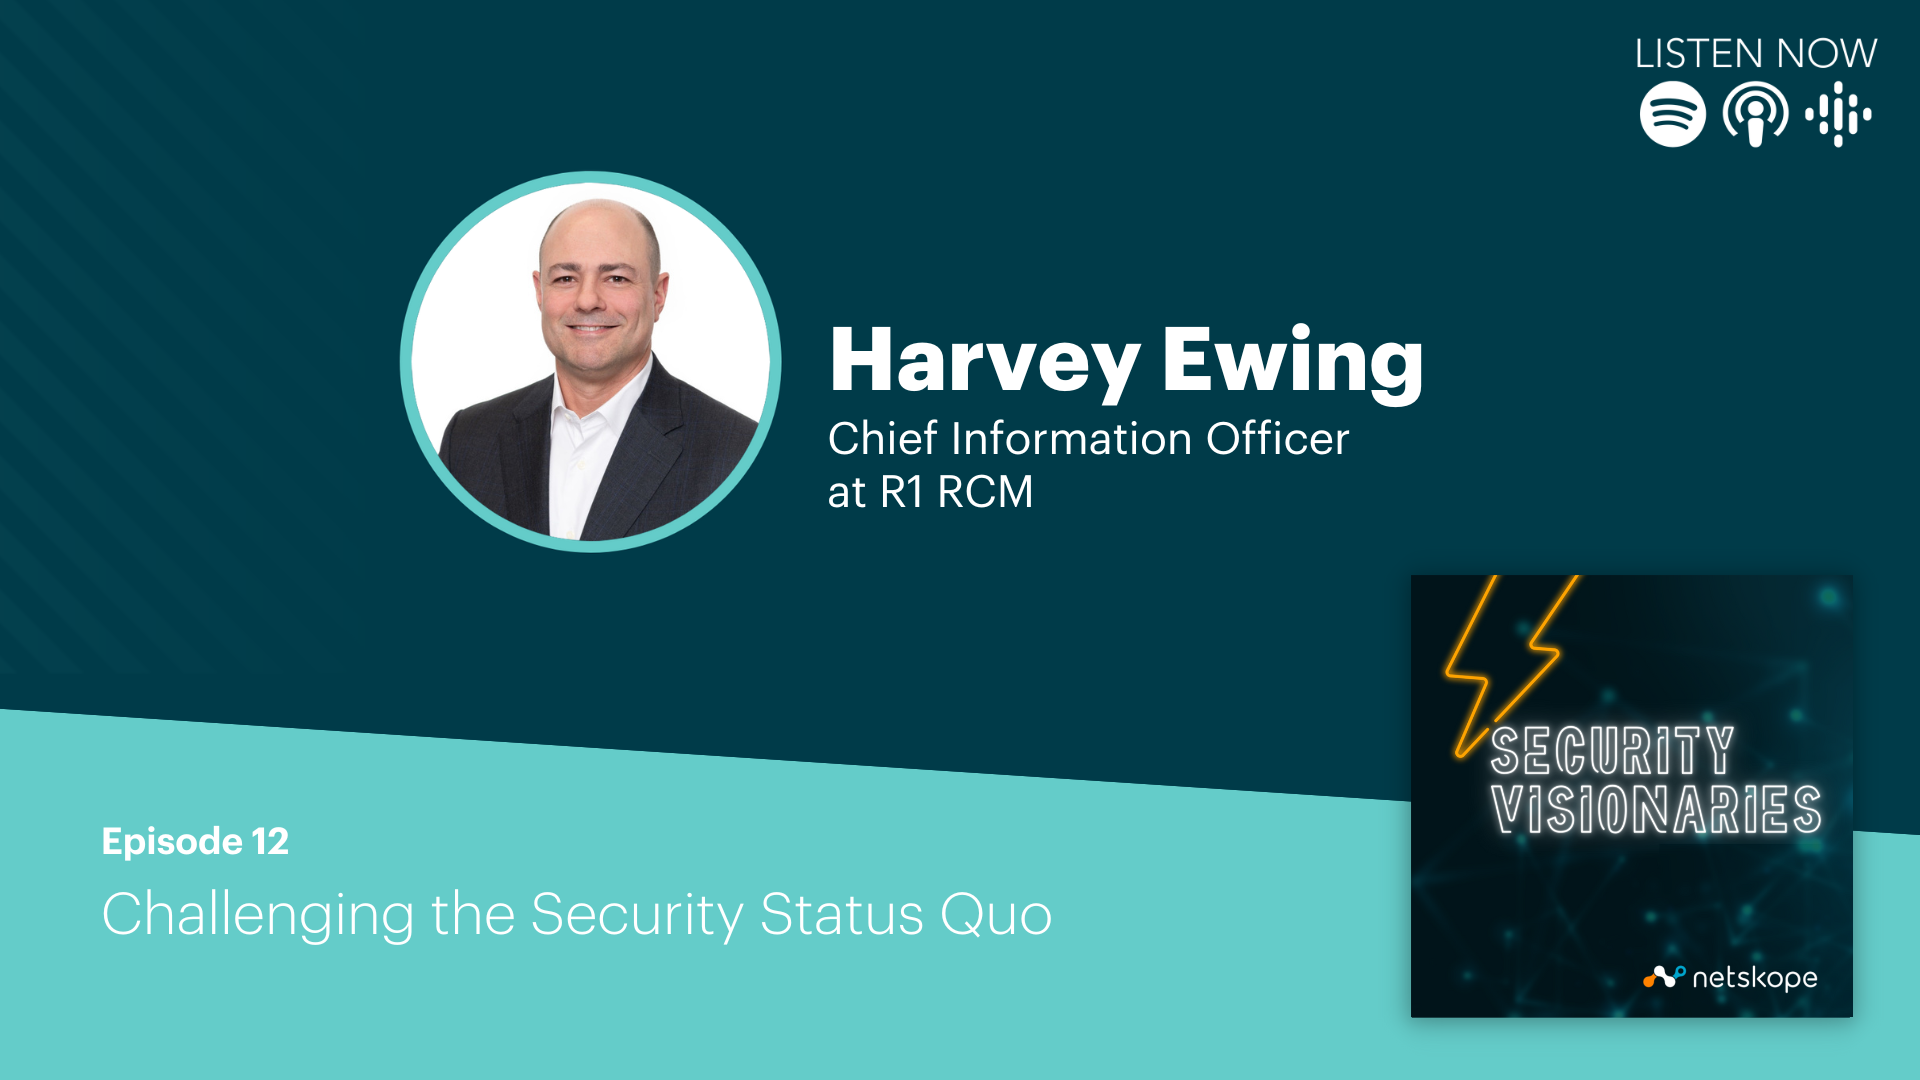 Challenging the Security Status Quo with Harvey Ewing, Chief Information Officer at R1 RCM